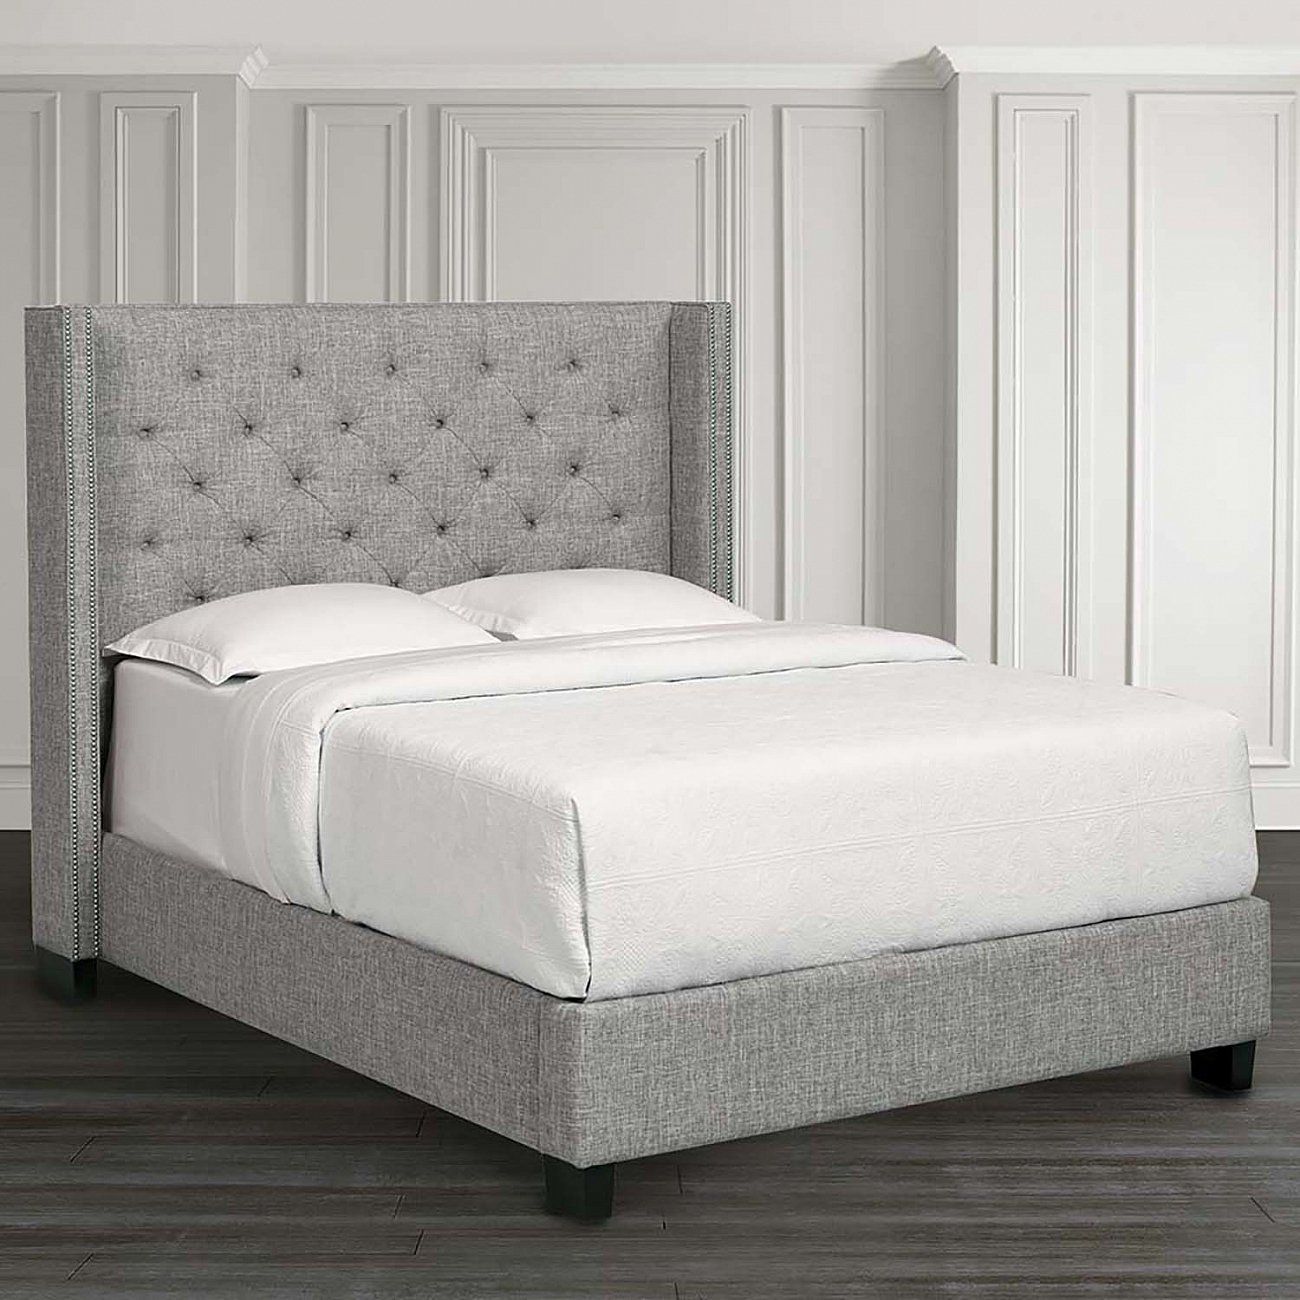 Double bed with upholstered headboard 180x200 cm grey-brown Wing